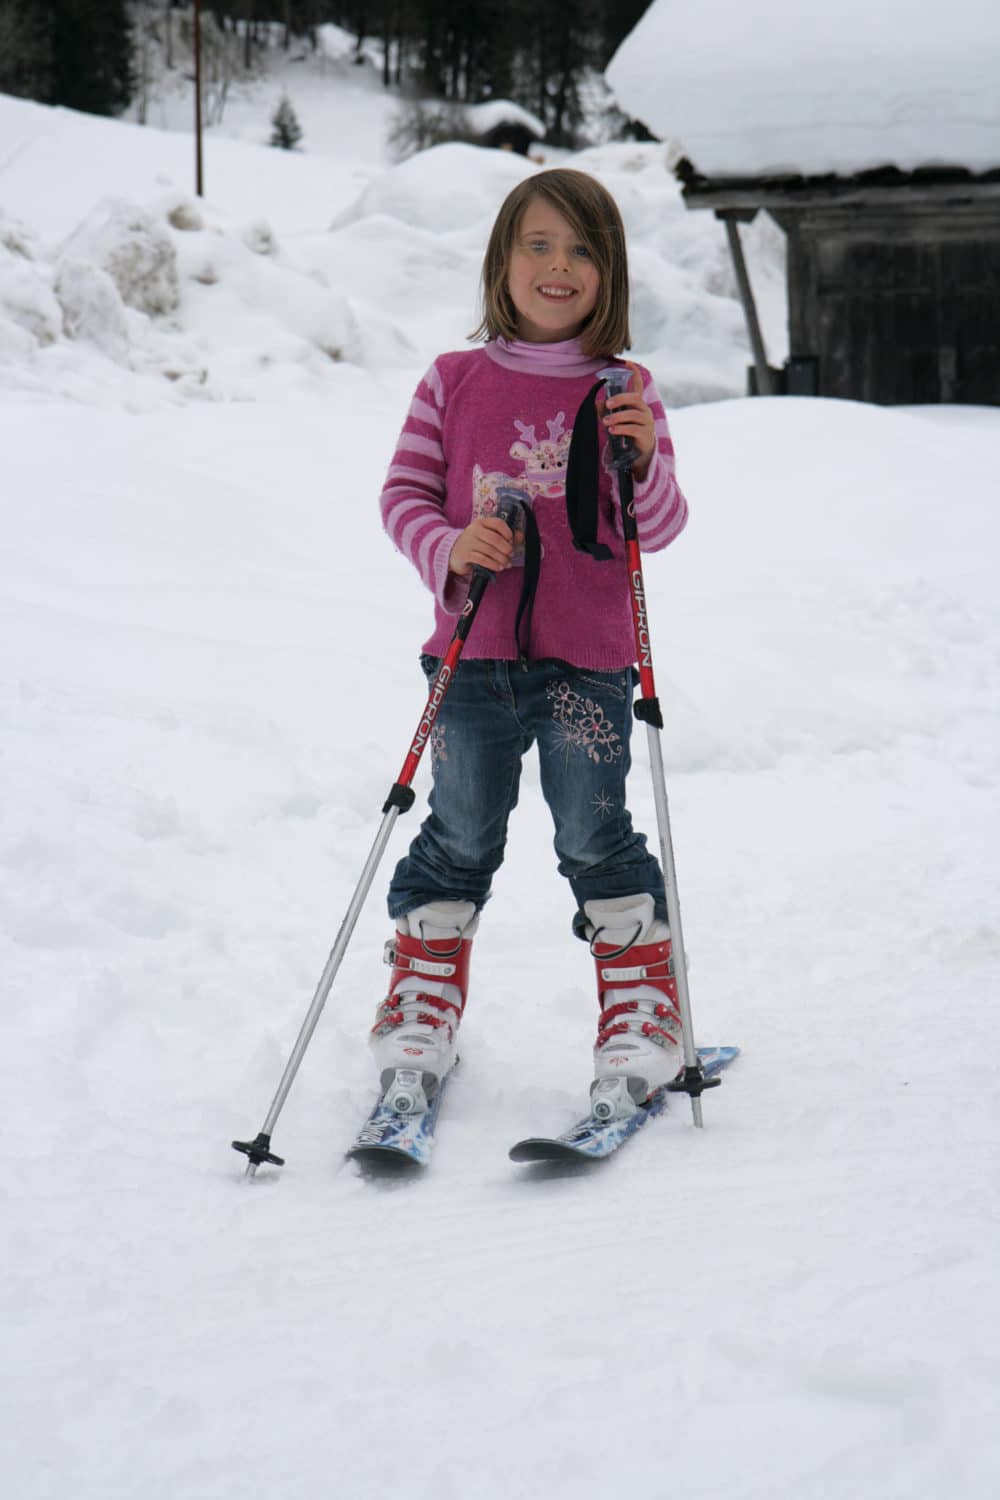 A young child skiing